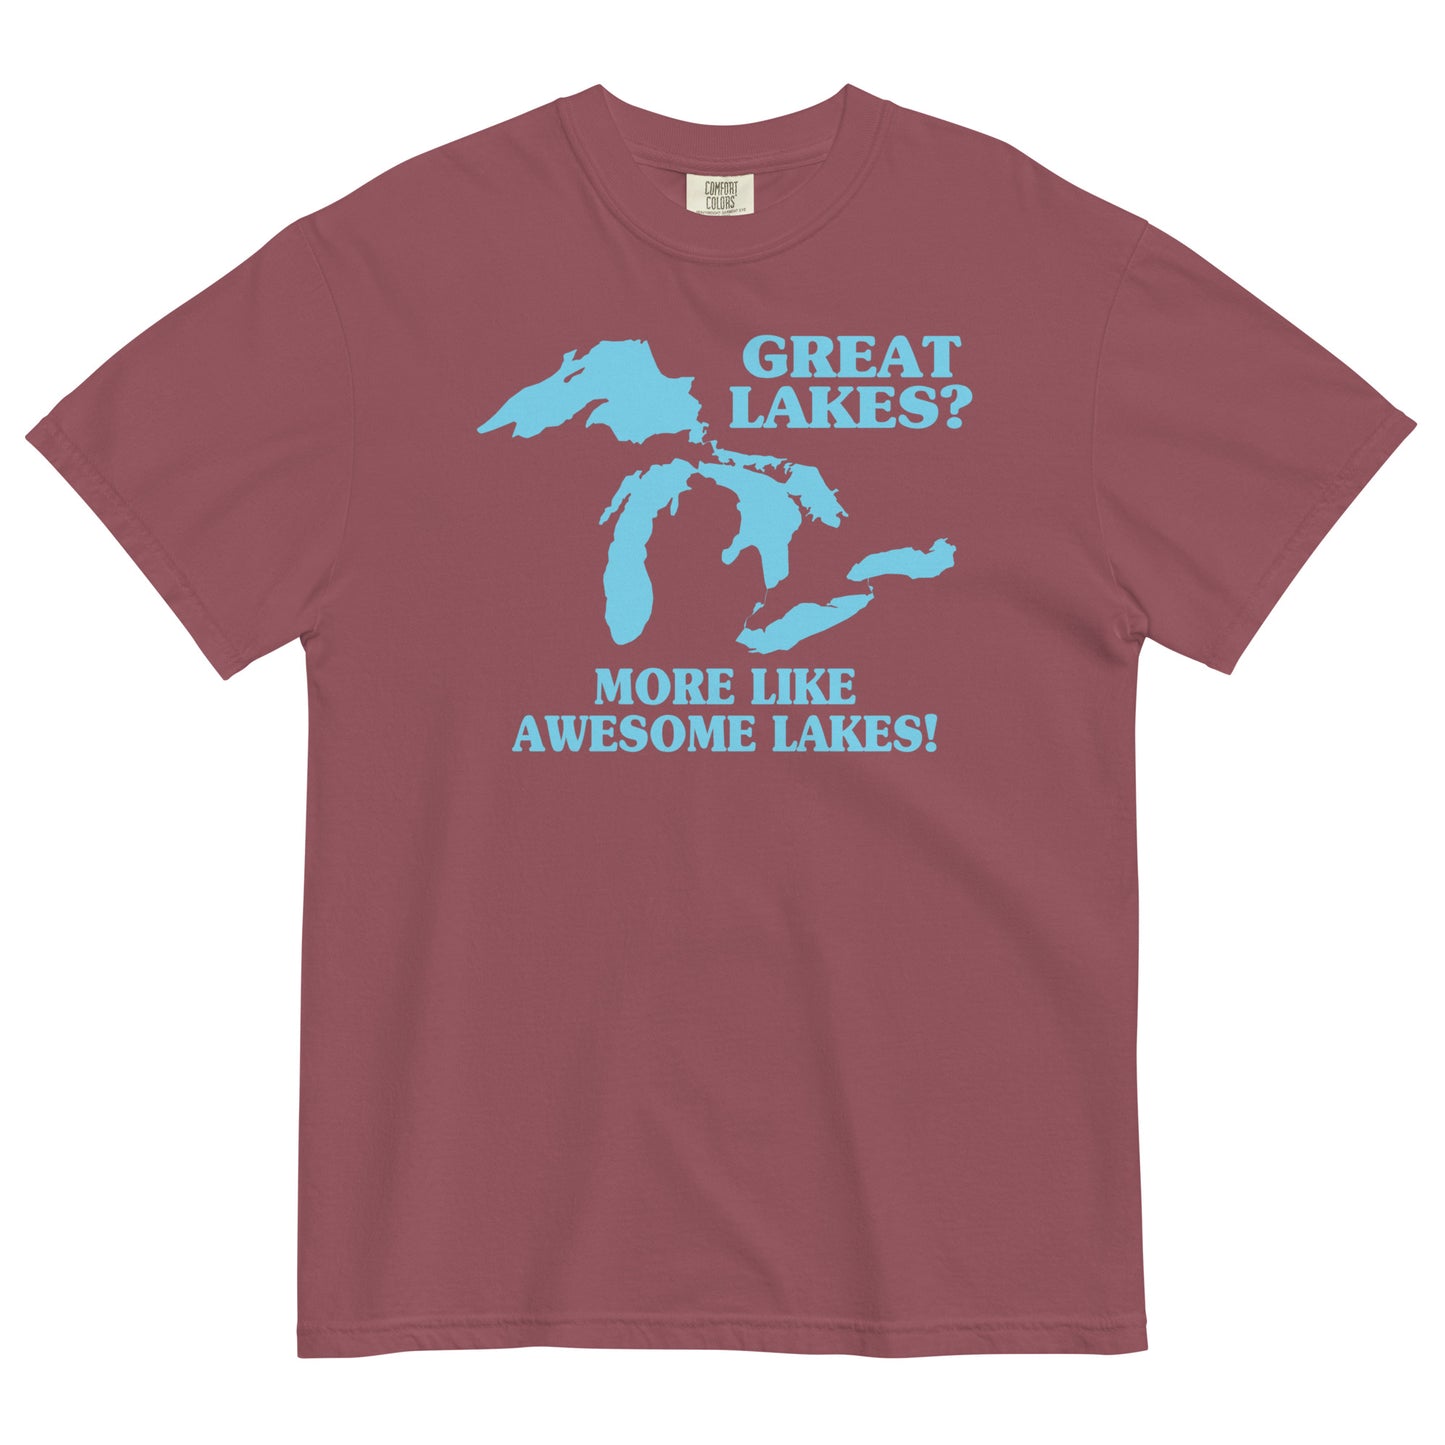 Great Lakes? Men's Relaxed Fit Tee